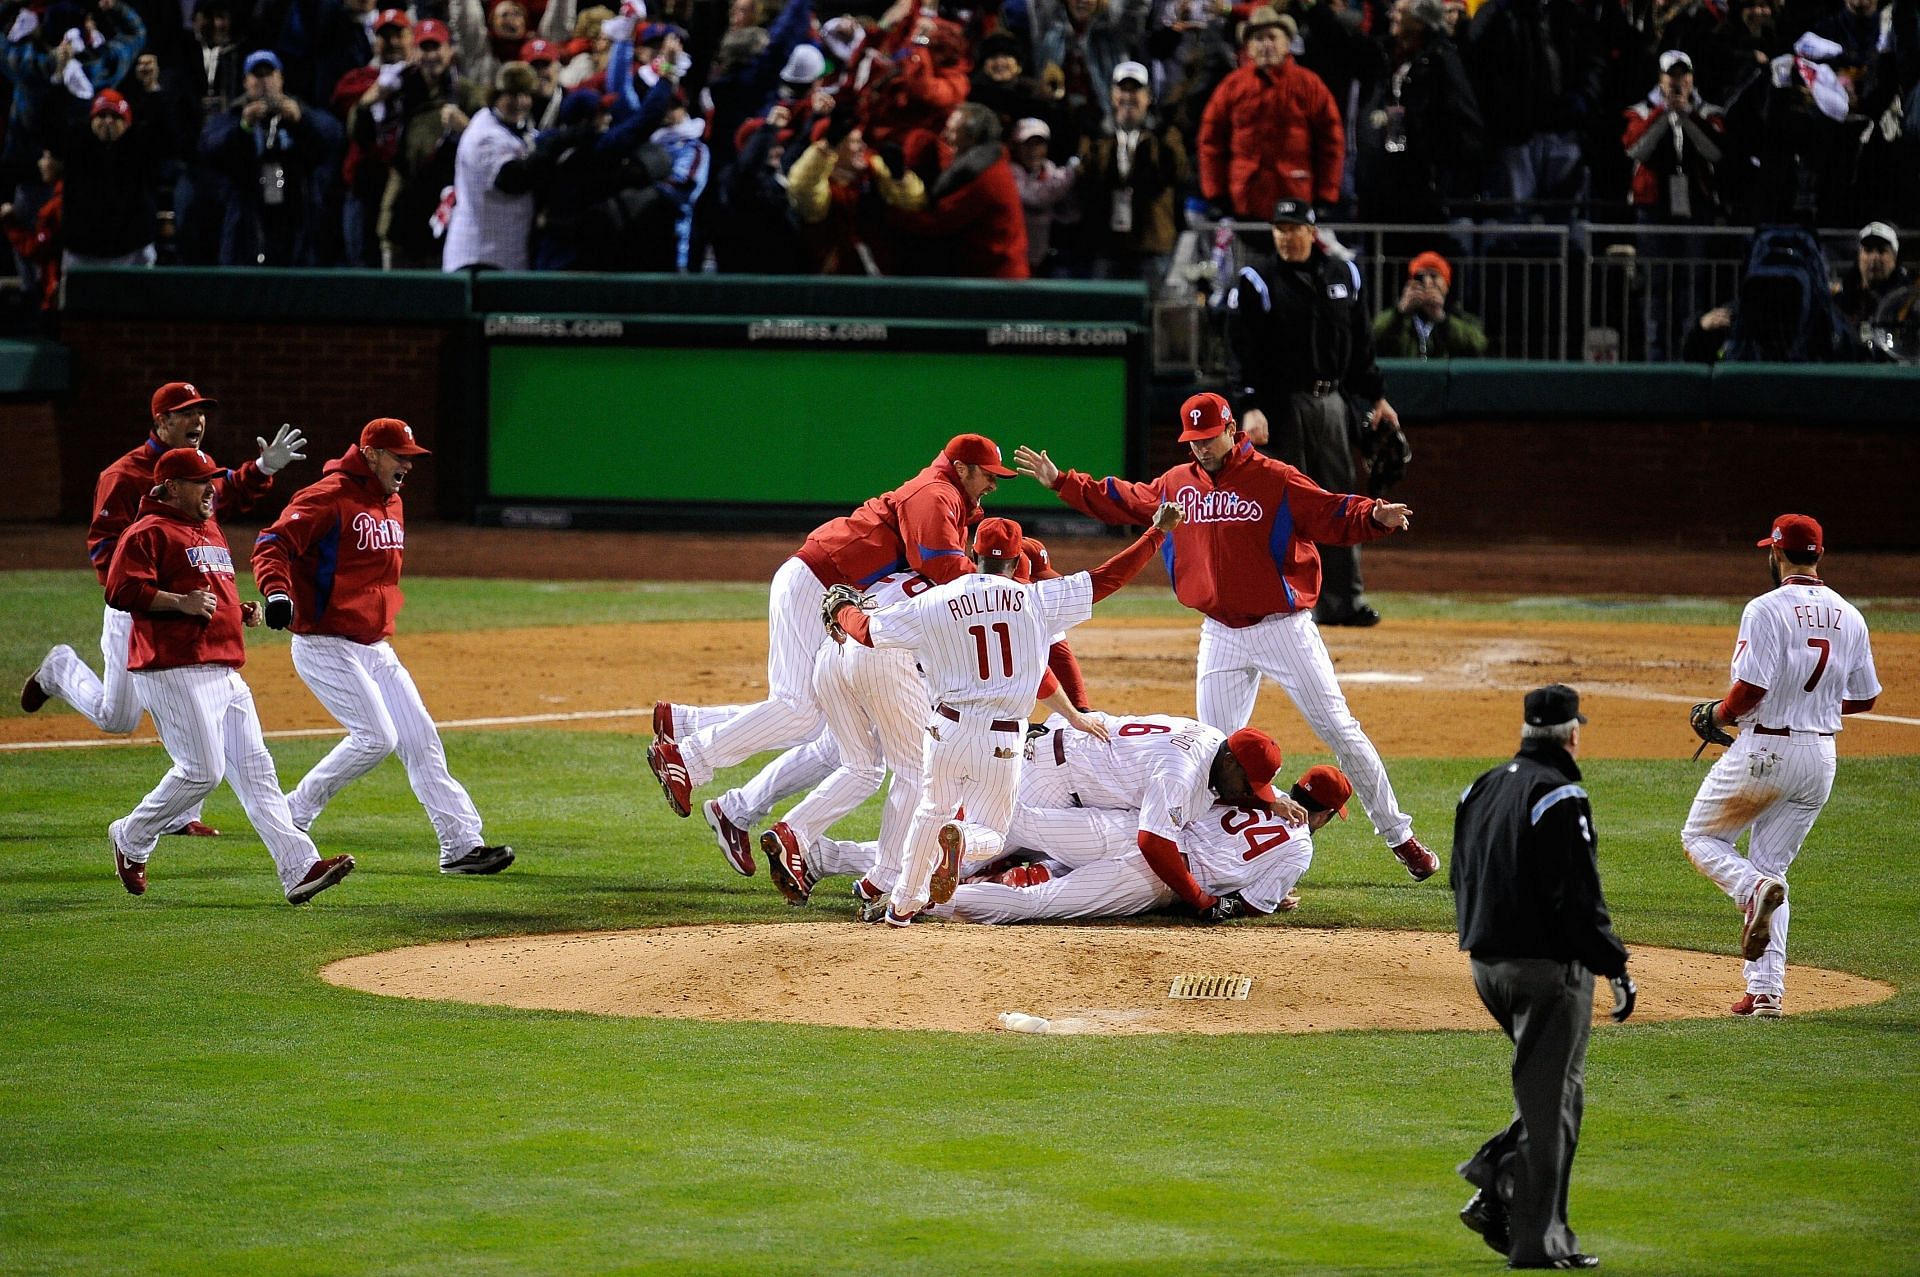 Phillies World Series Appearances: How many times have the